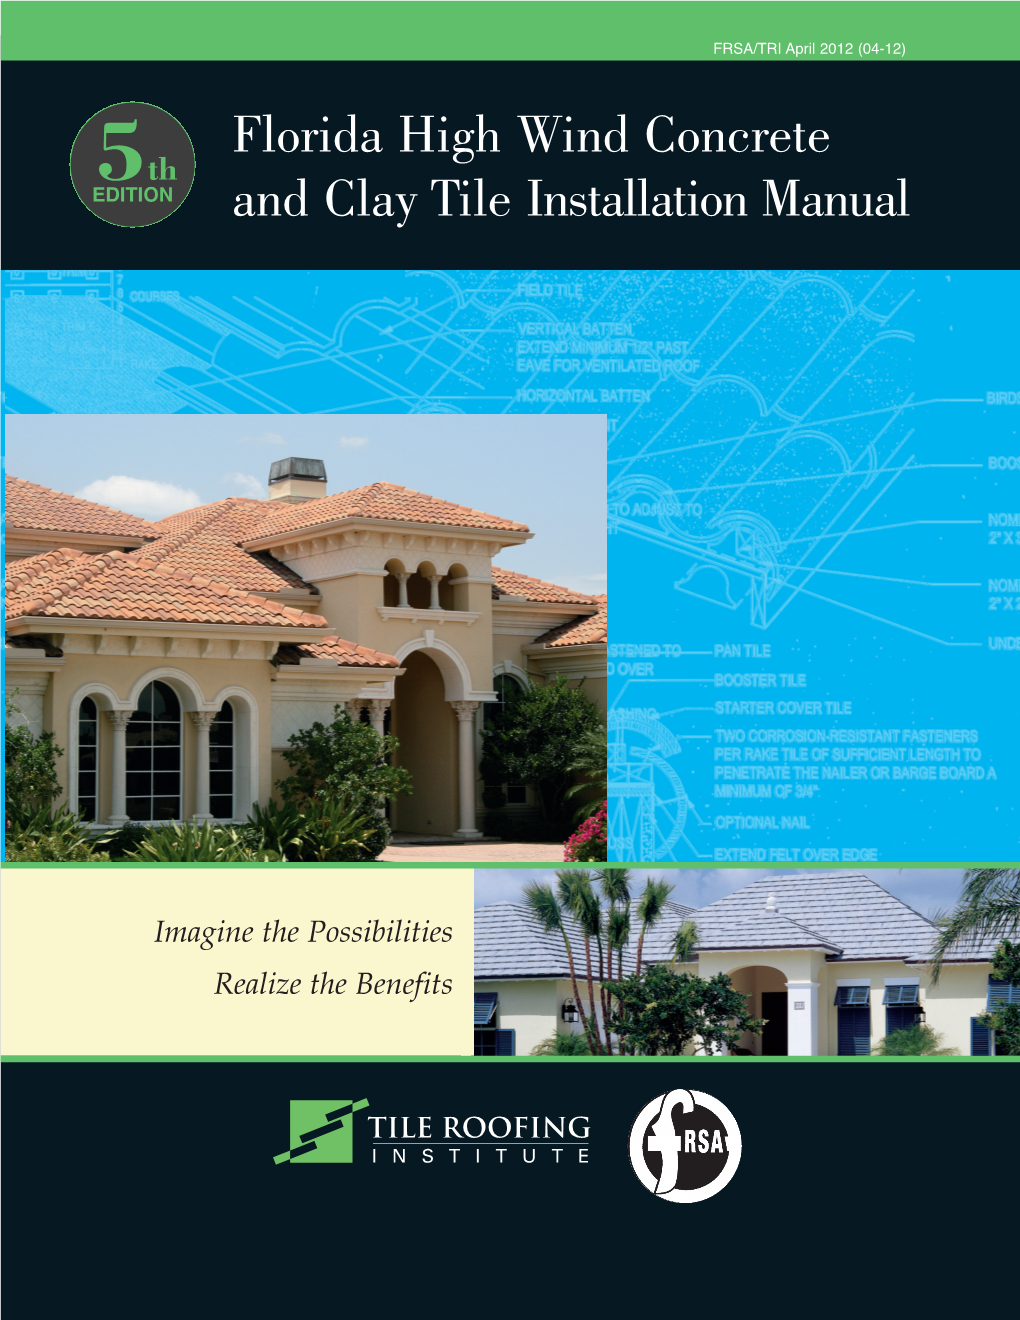 Florida High Wind Concrete and Clay Tile Installation Manual for High Wind Applications in Florida